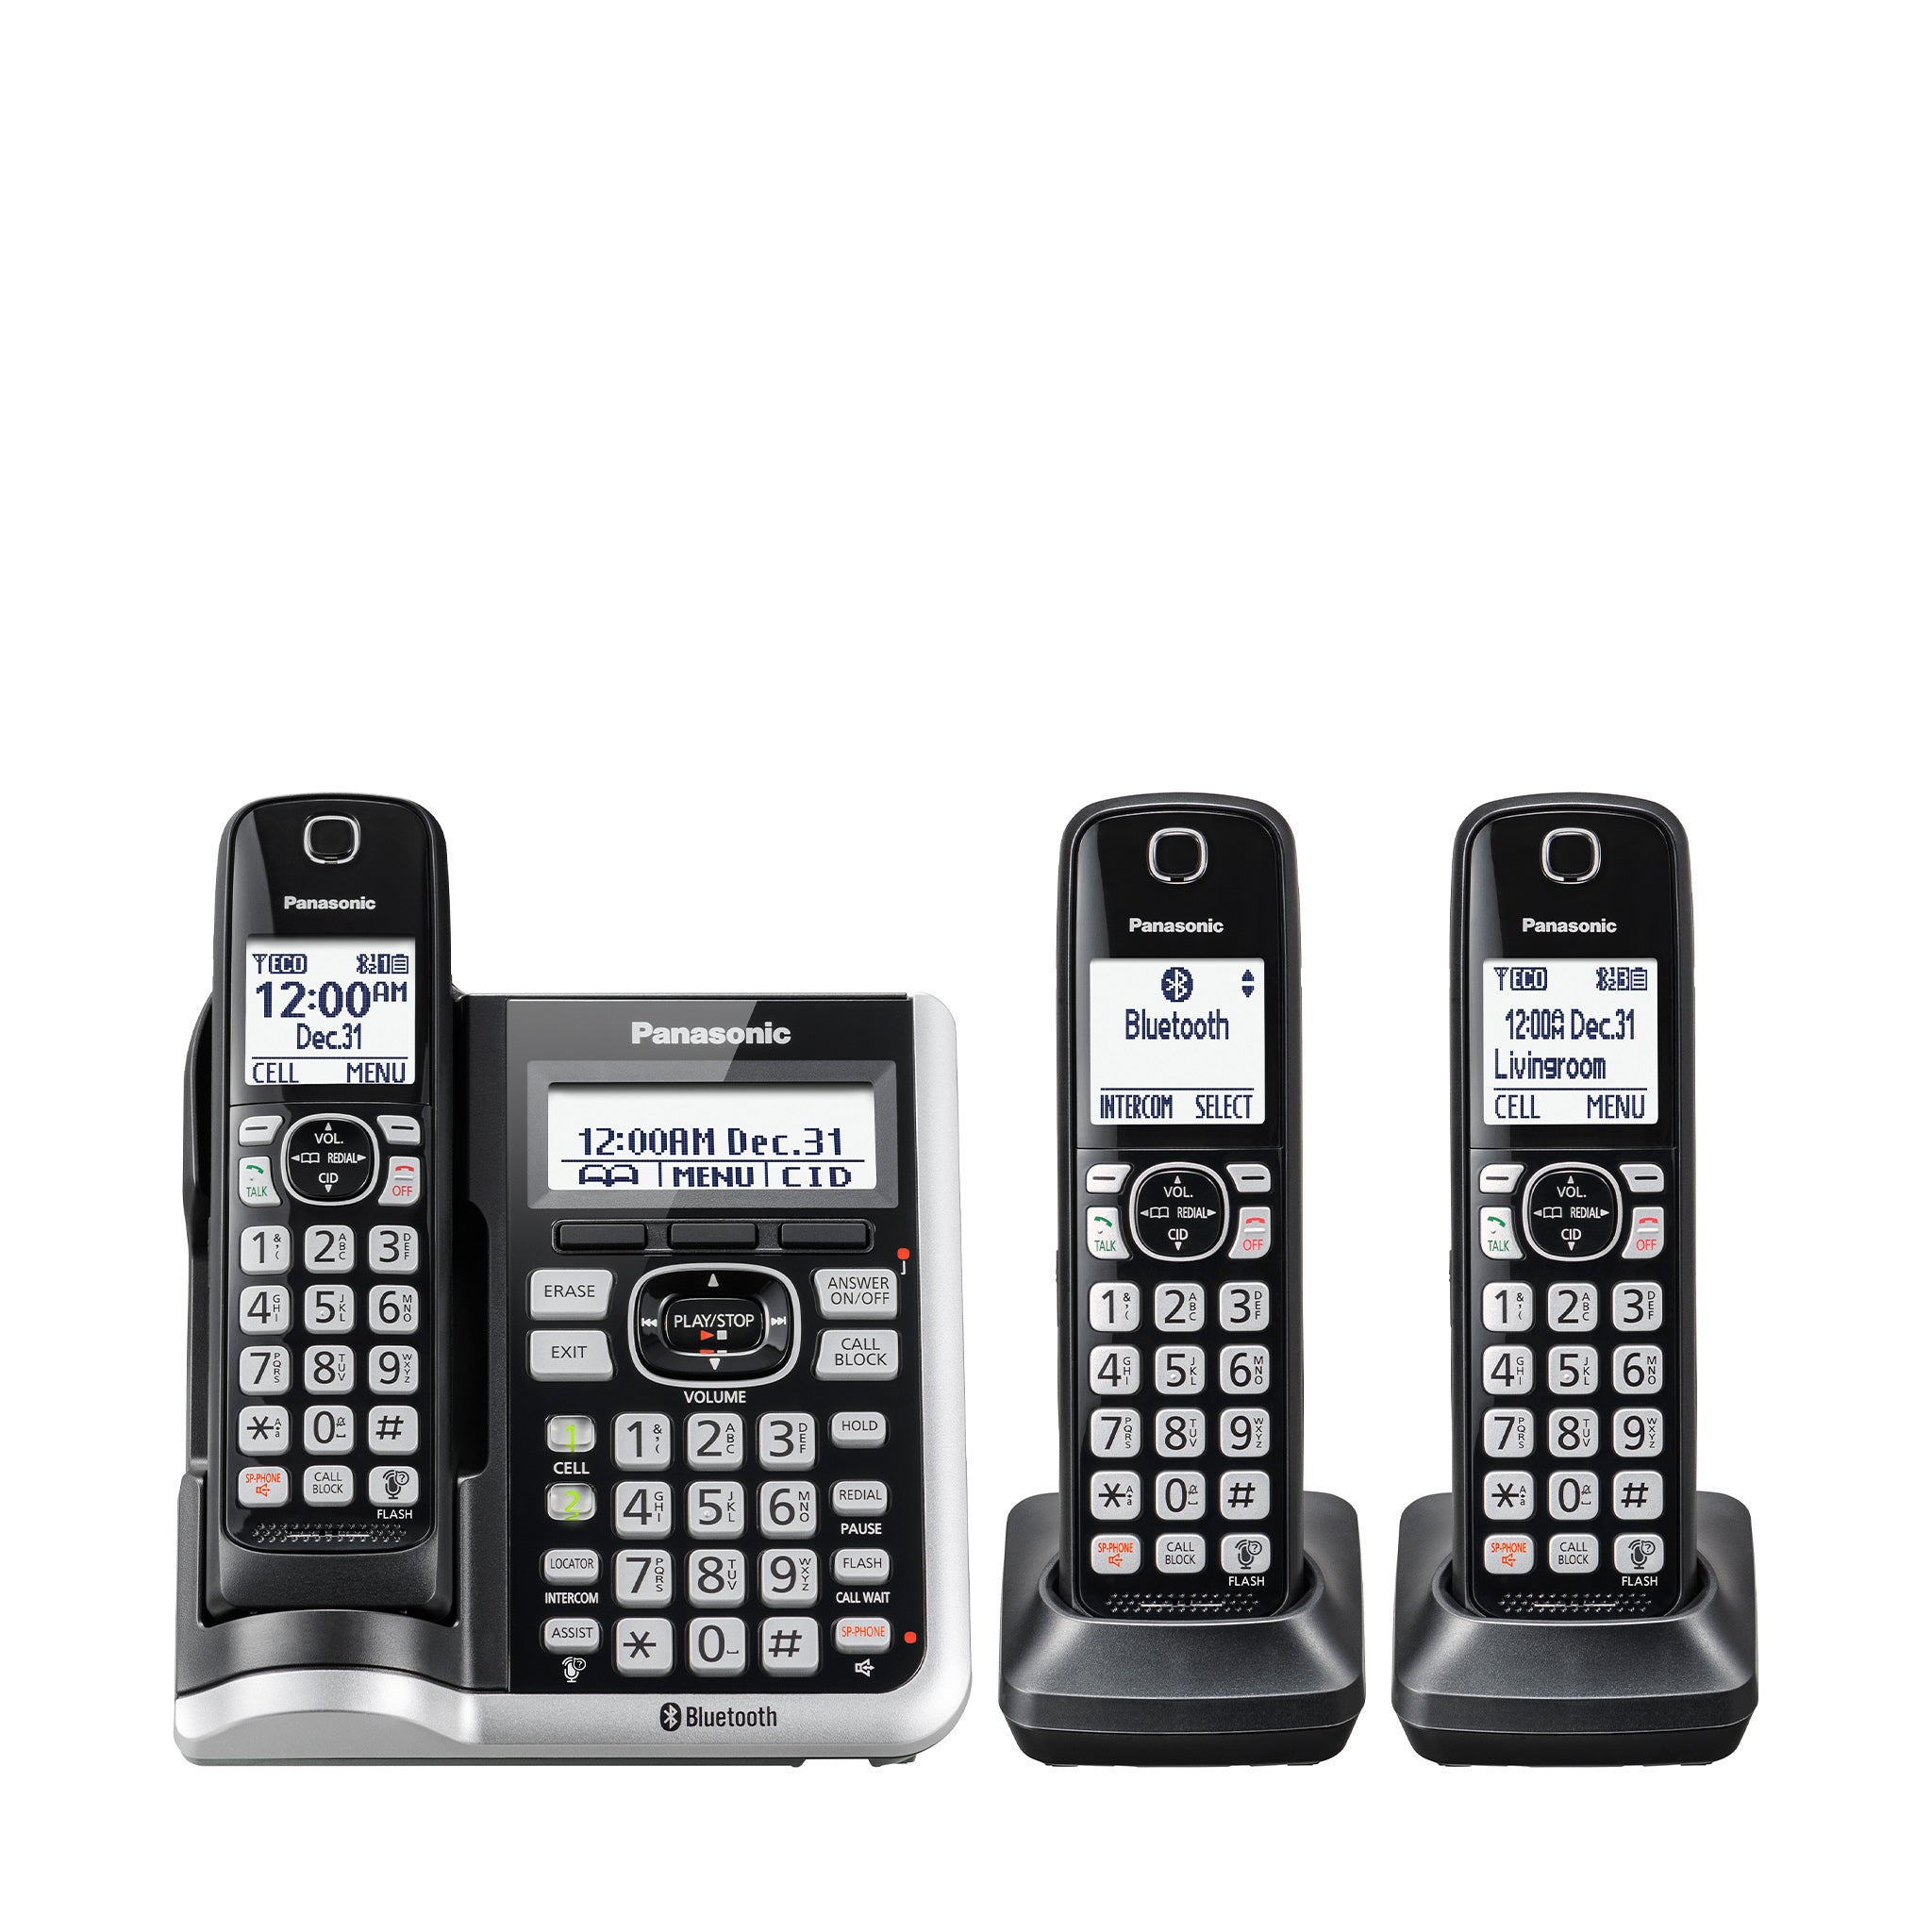 Panasonic Link2Cell Bluetooth Cordless Phone with Answering